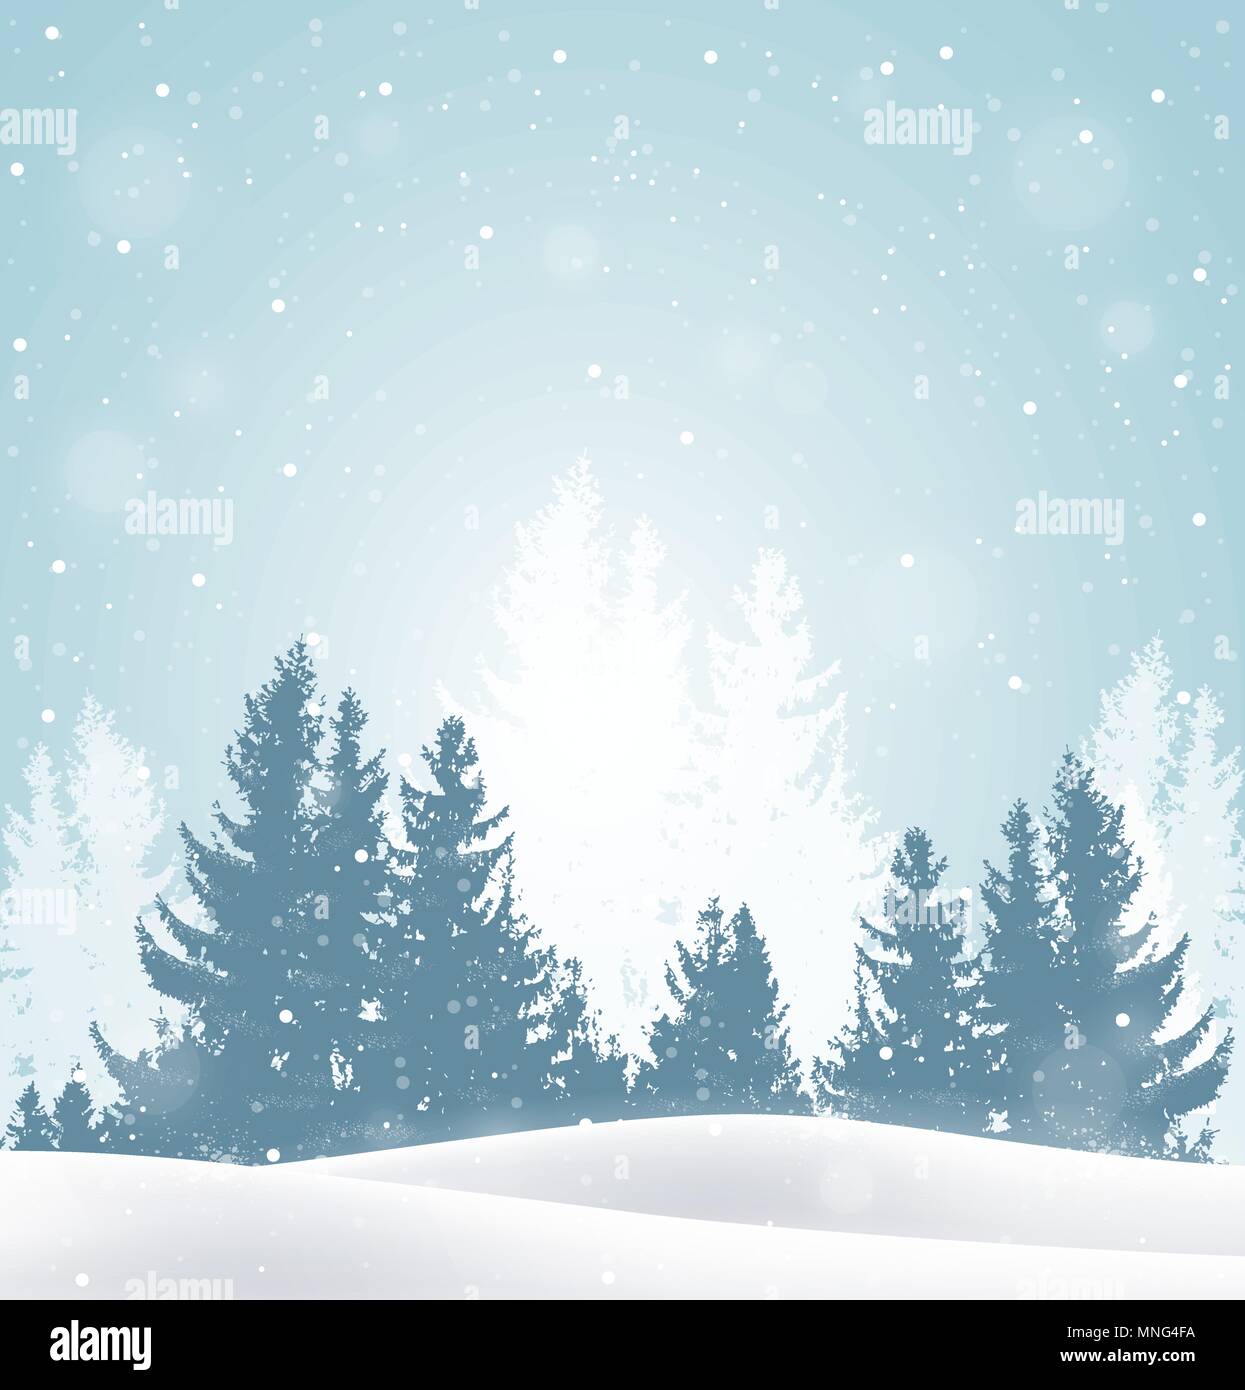 Christmas vector background with winter snowy landscape. New Year greeting card Stock Vector